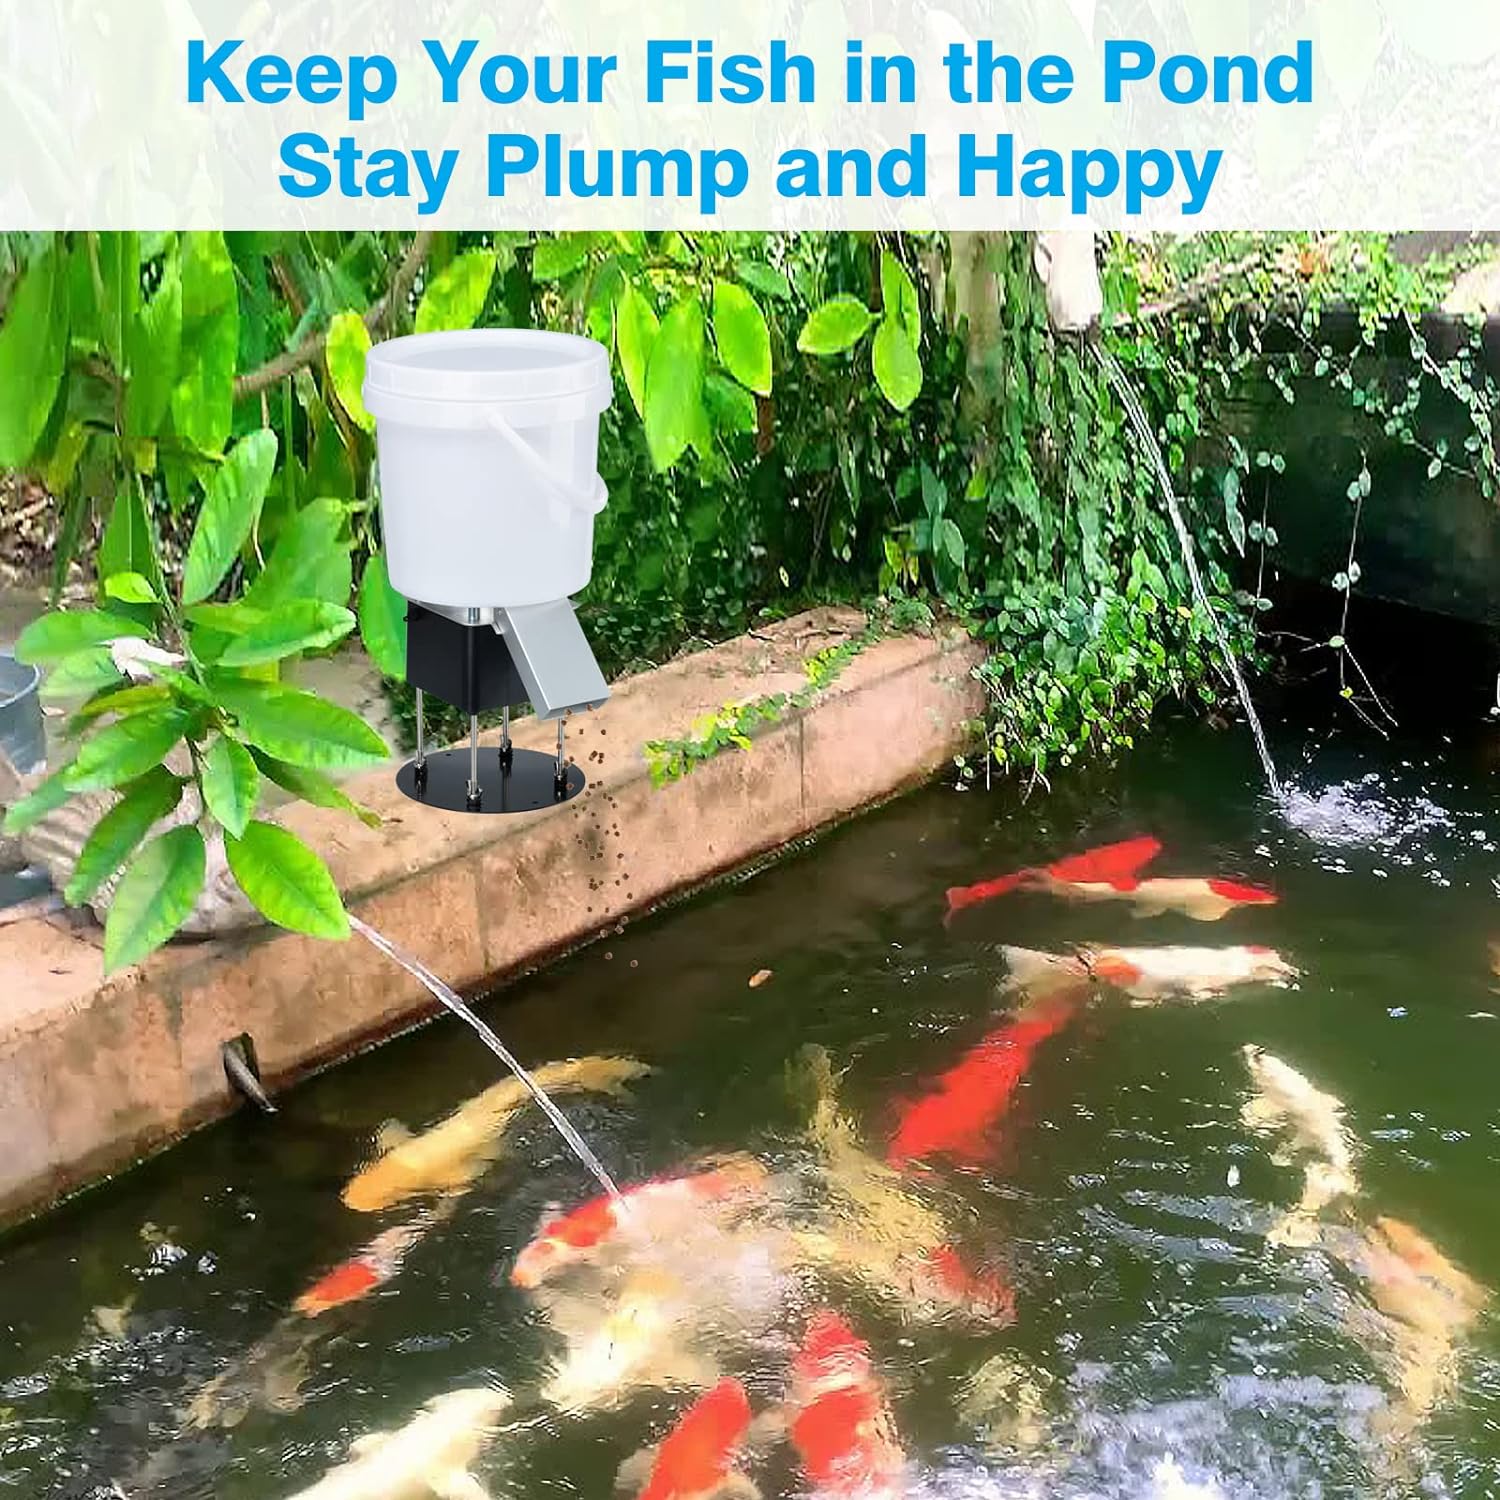 Pond Fish Feeder, Briidea Automatic Fish Feeder for Pond with Animal-Proof Design, 4L Large Capacity, Low Battery Alert, Perfect for Daily & Vacation Feeding